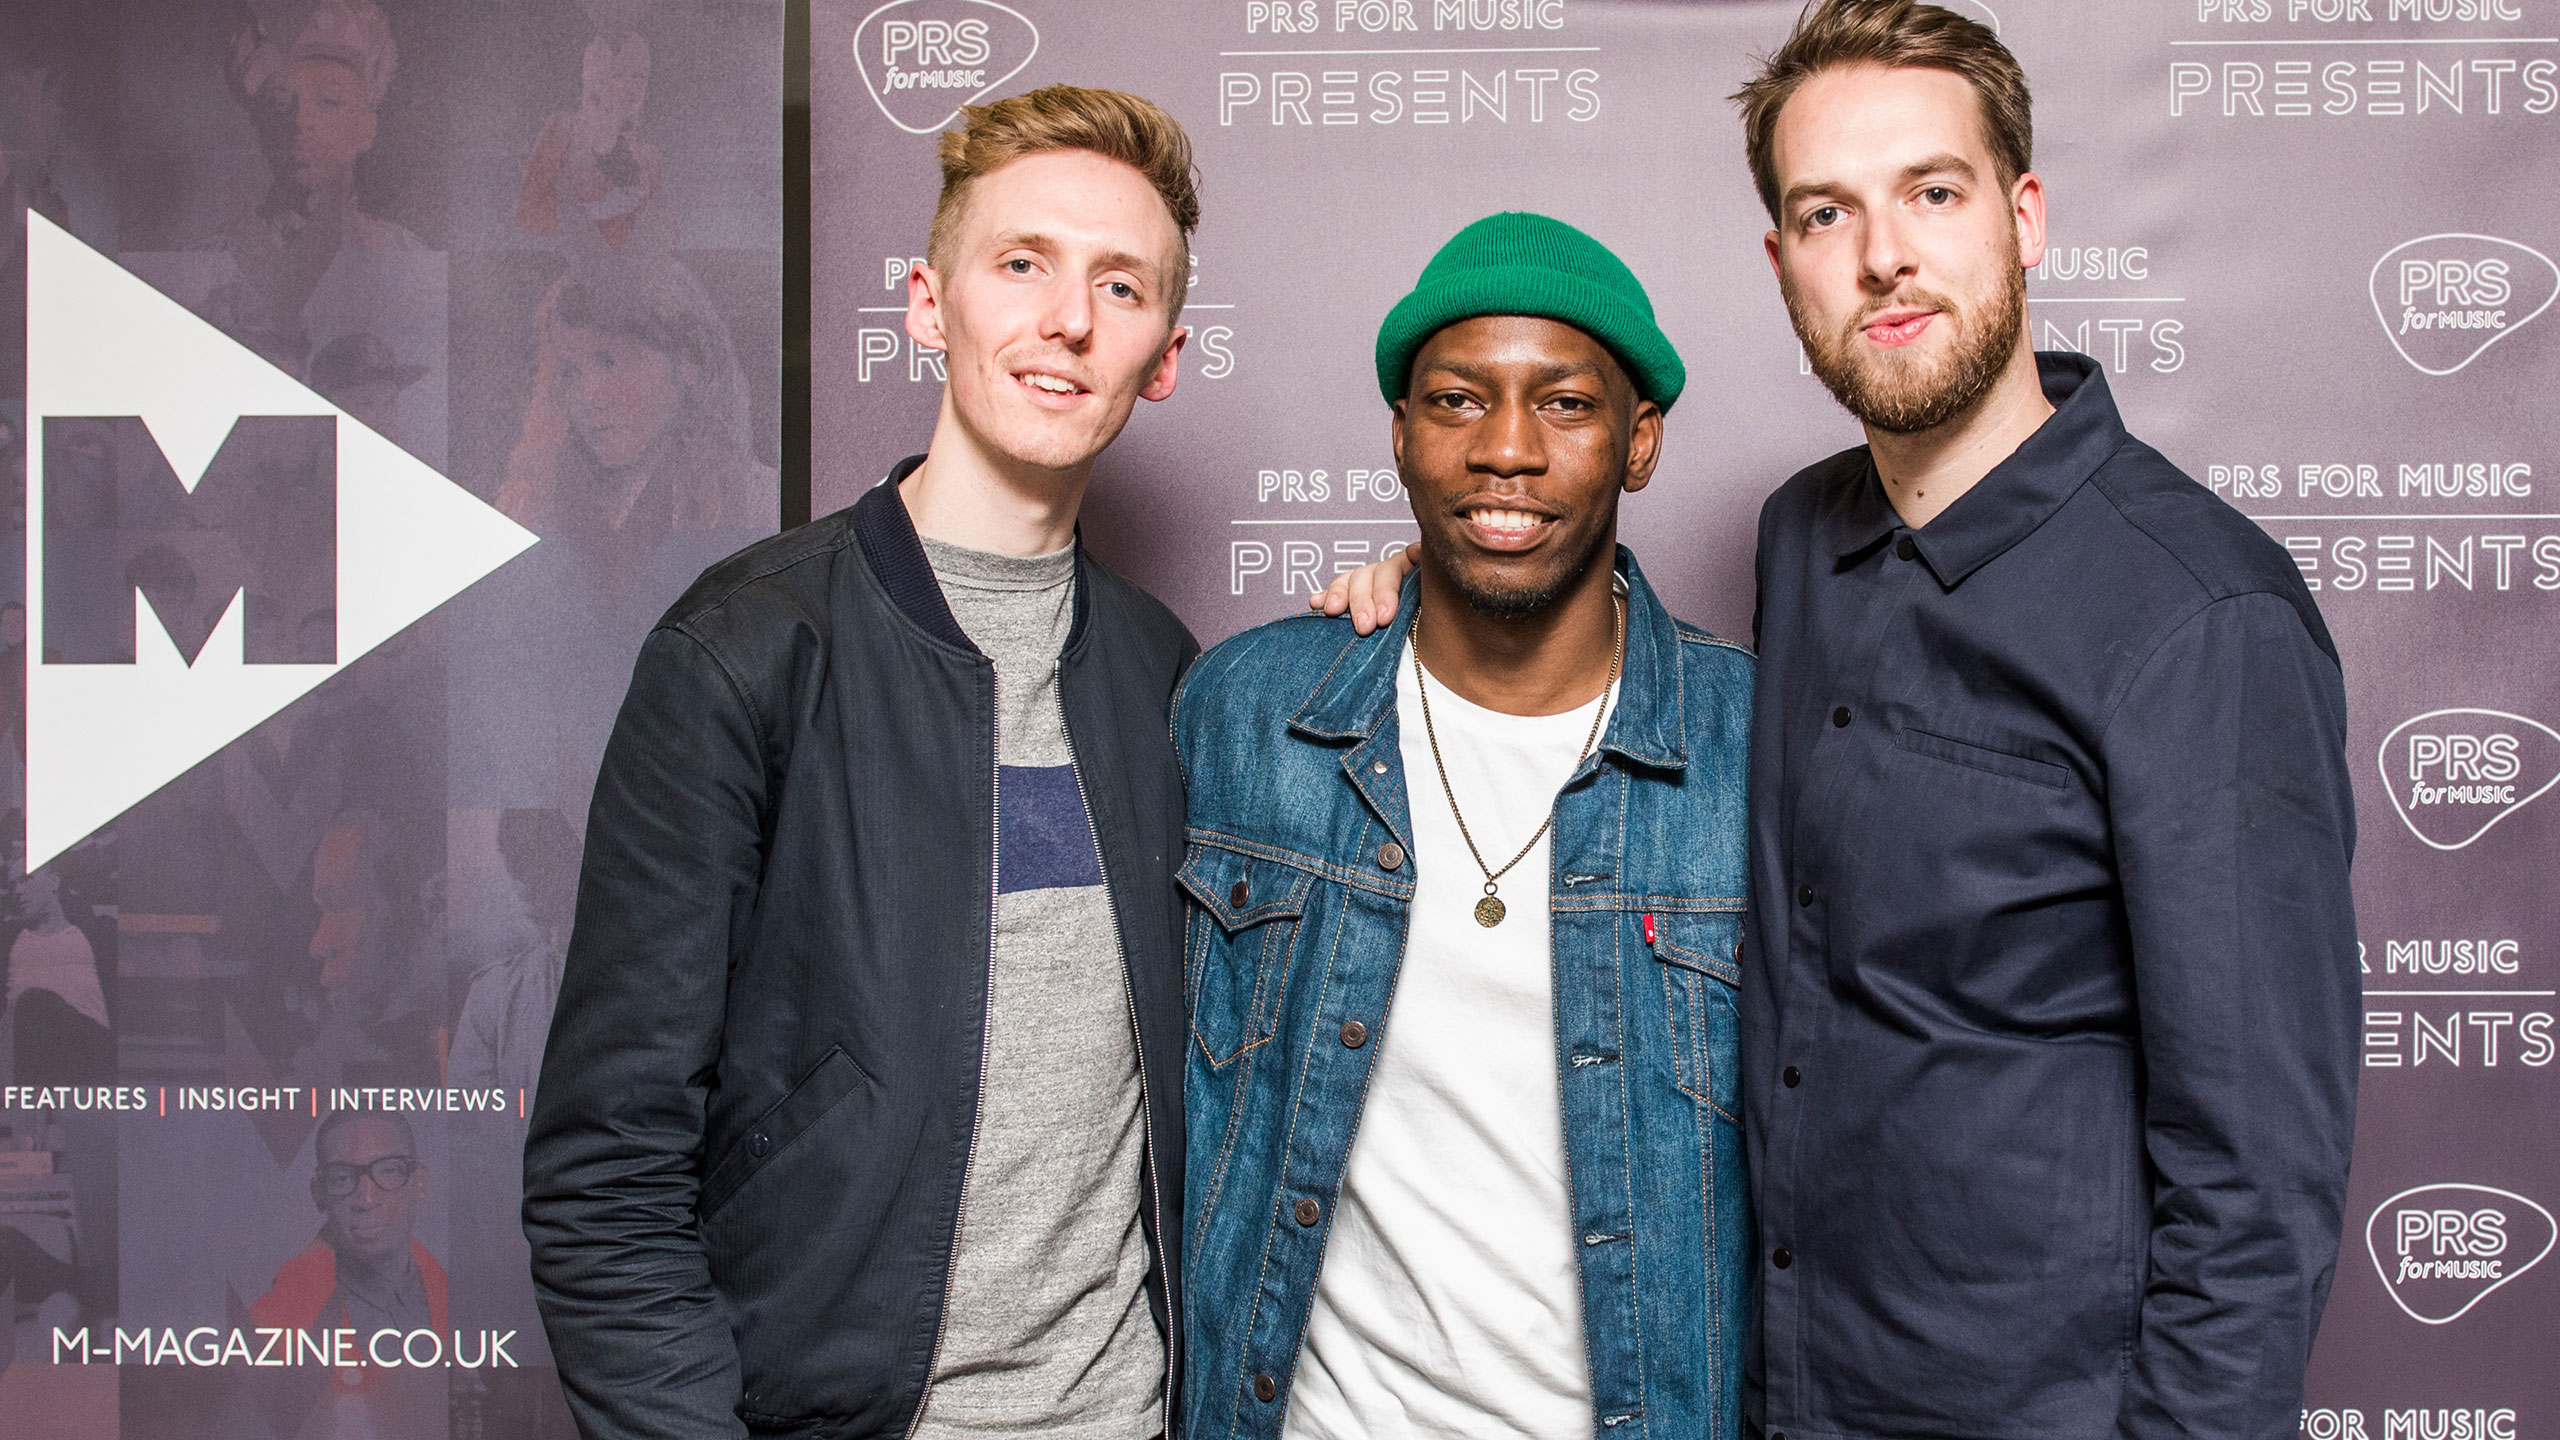 James Hatcher (Honne), Tiggs Da Author and Andy Clutterbuck (Honne) at PRS Presents